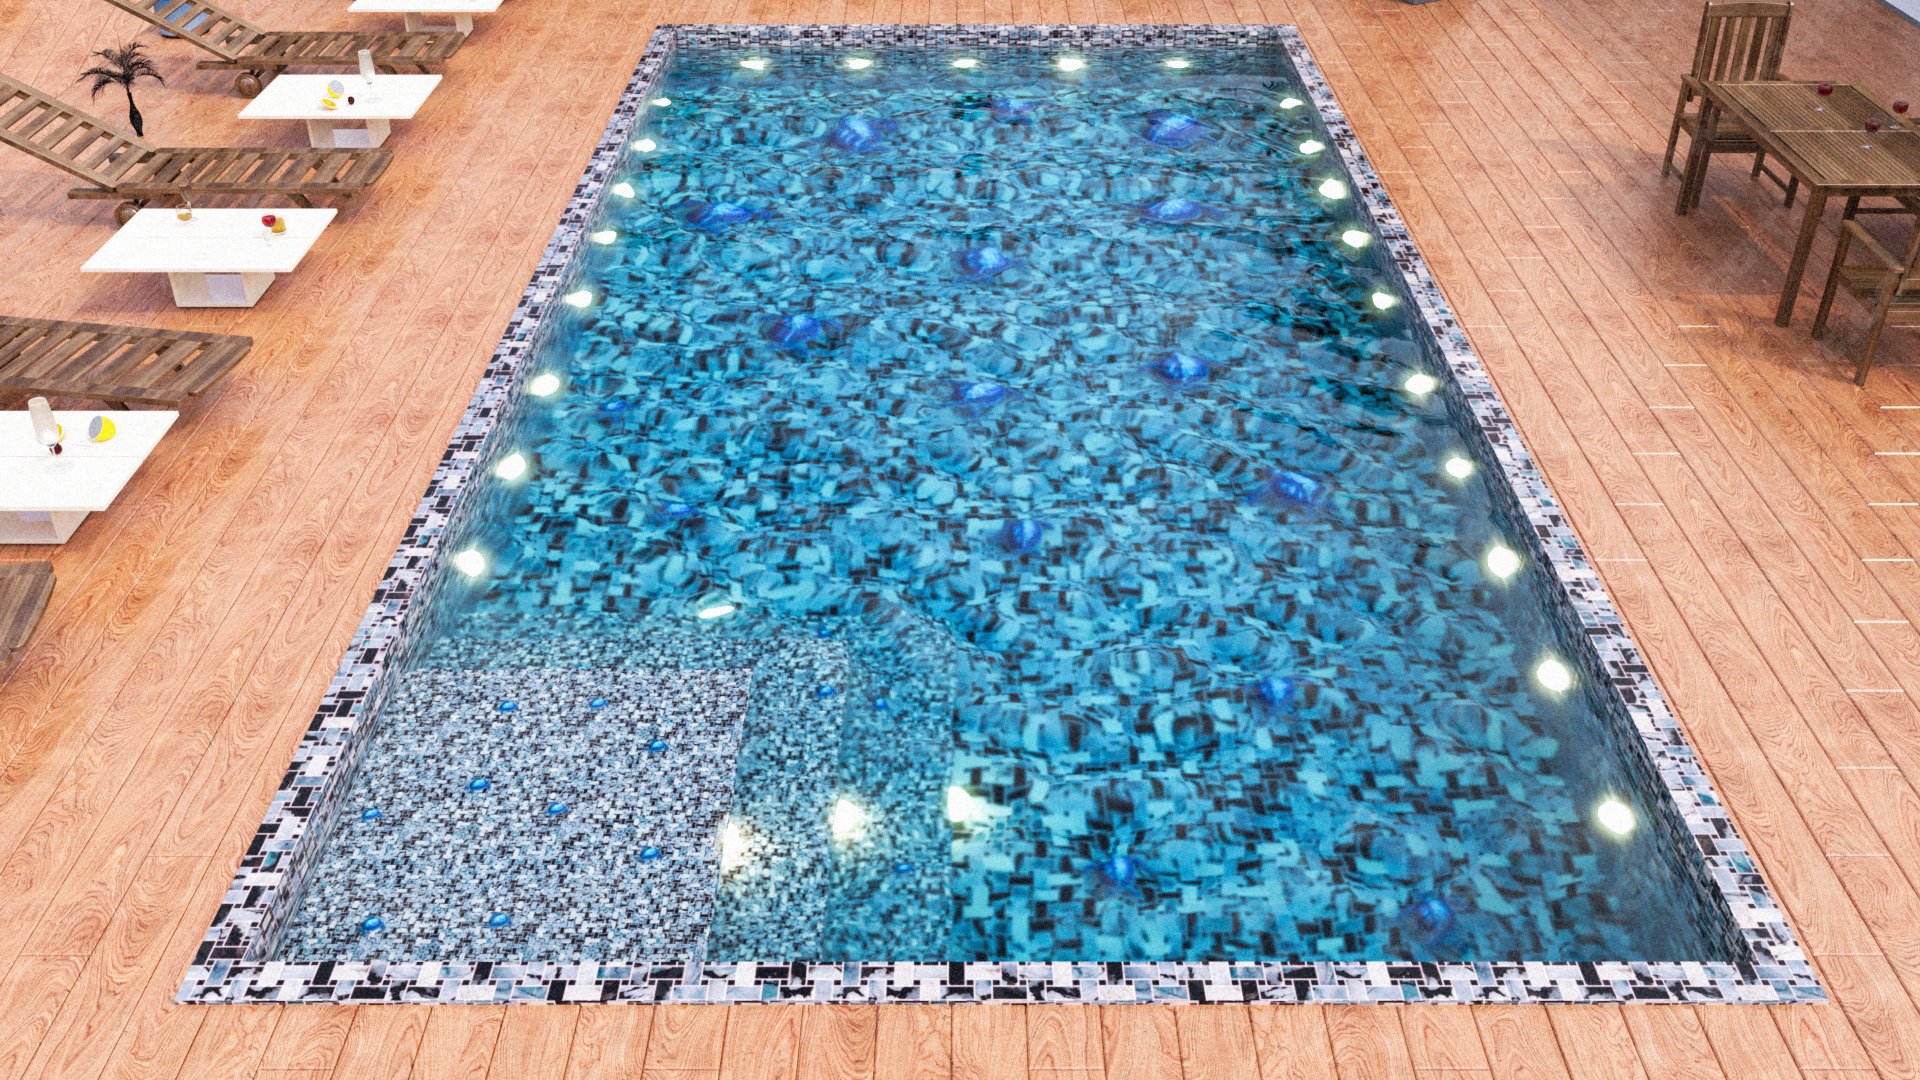 Pool with 3d turtles on the floor - Alternative version - 36